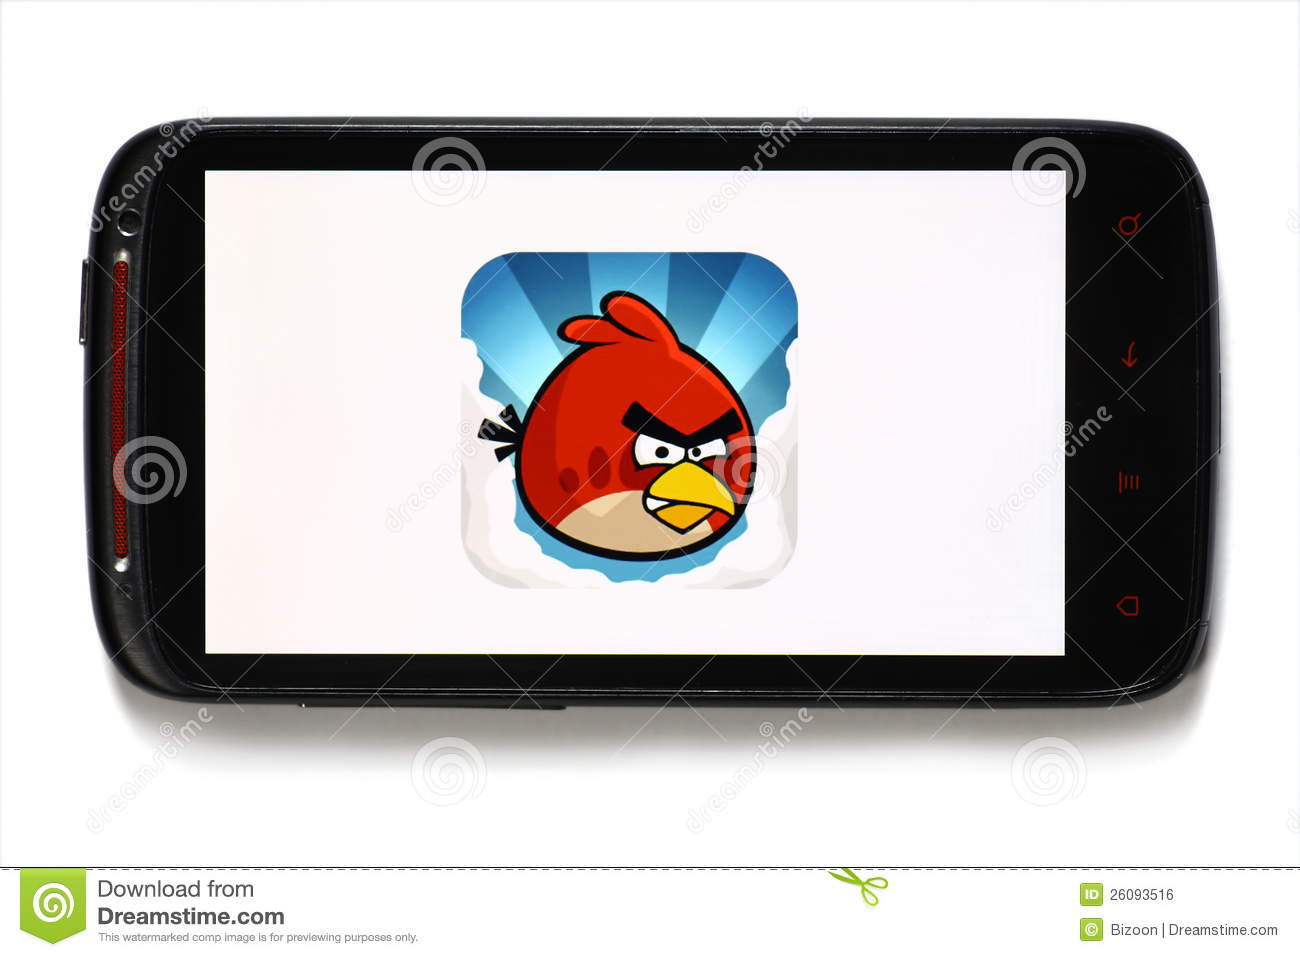 Angry birds game download for keypad mobile